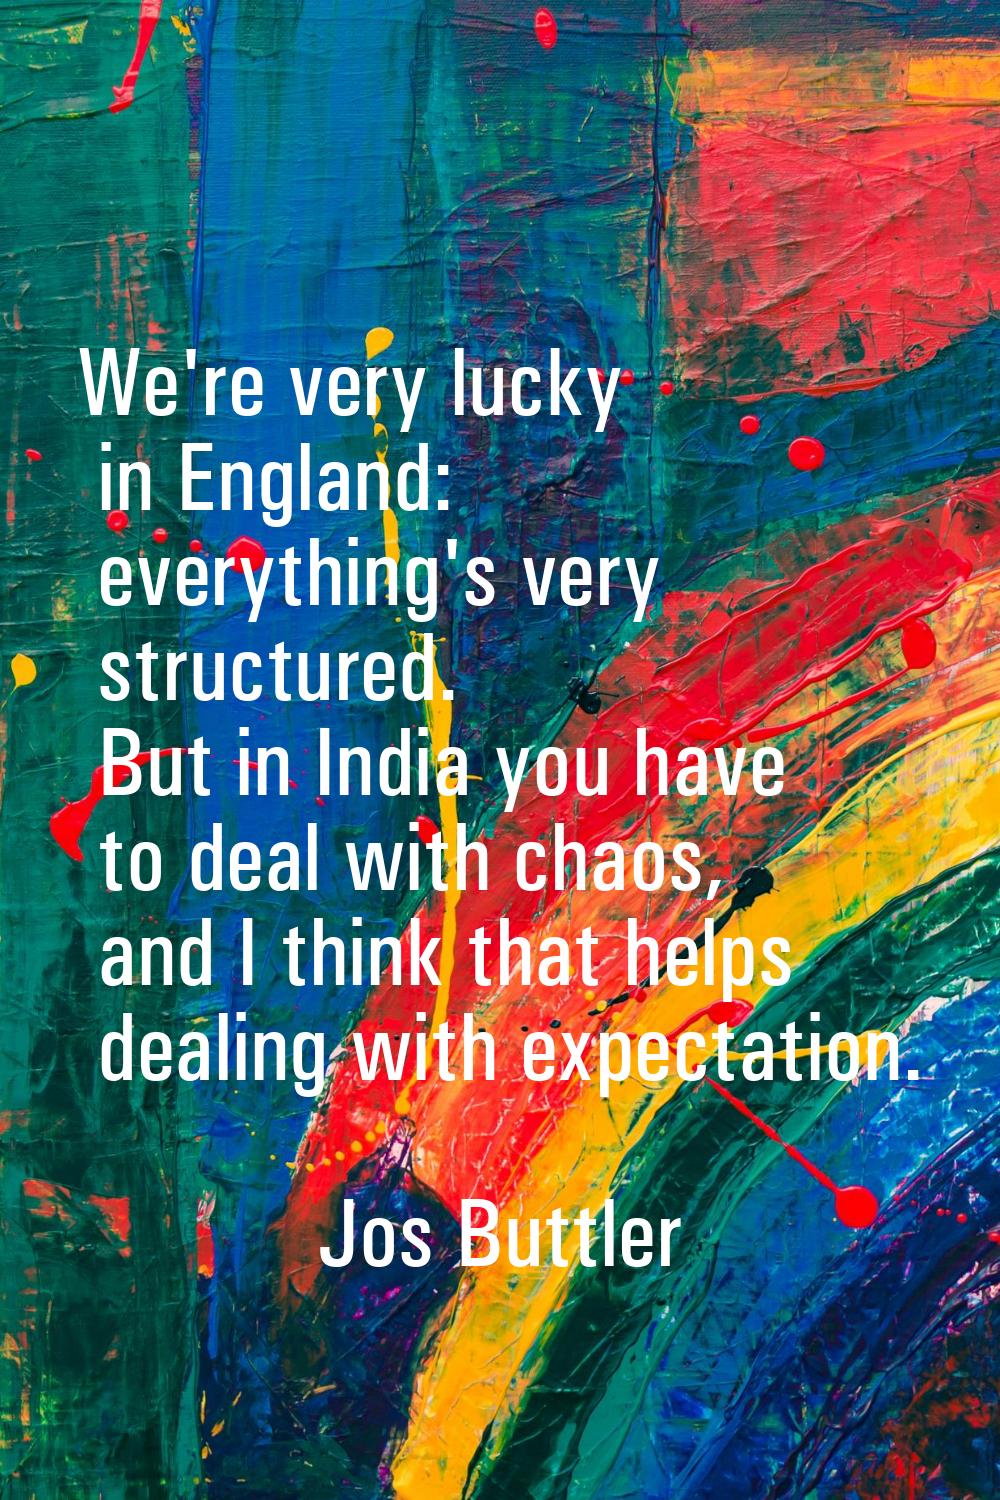 We're very lucky in England: everything's very structured. But in India you have to deal with chaos